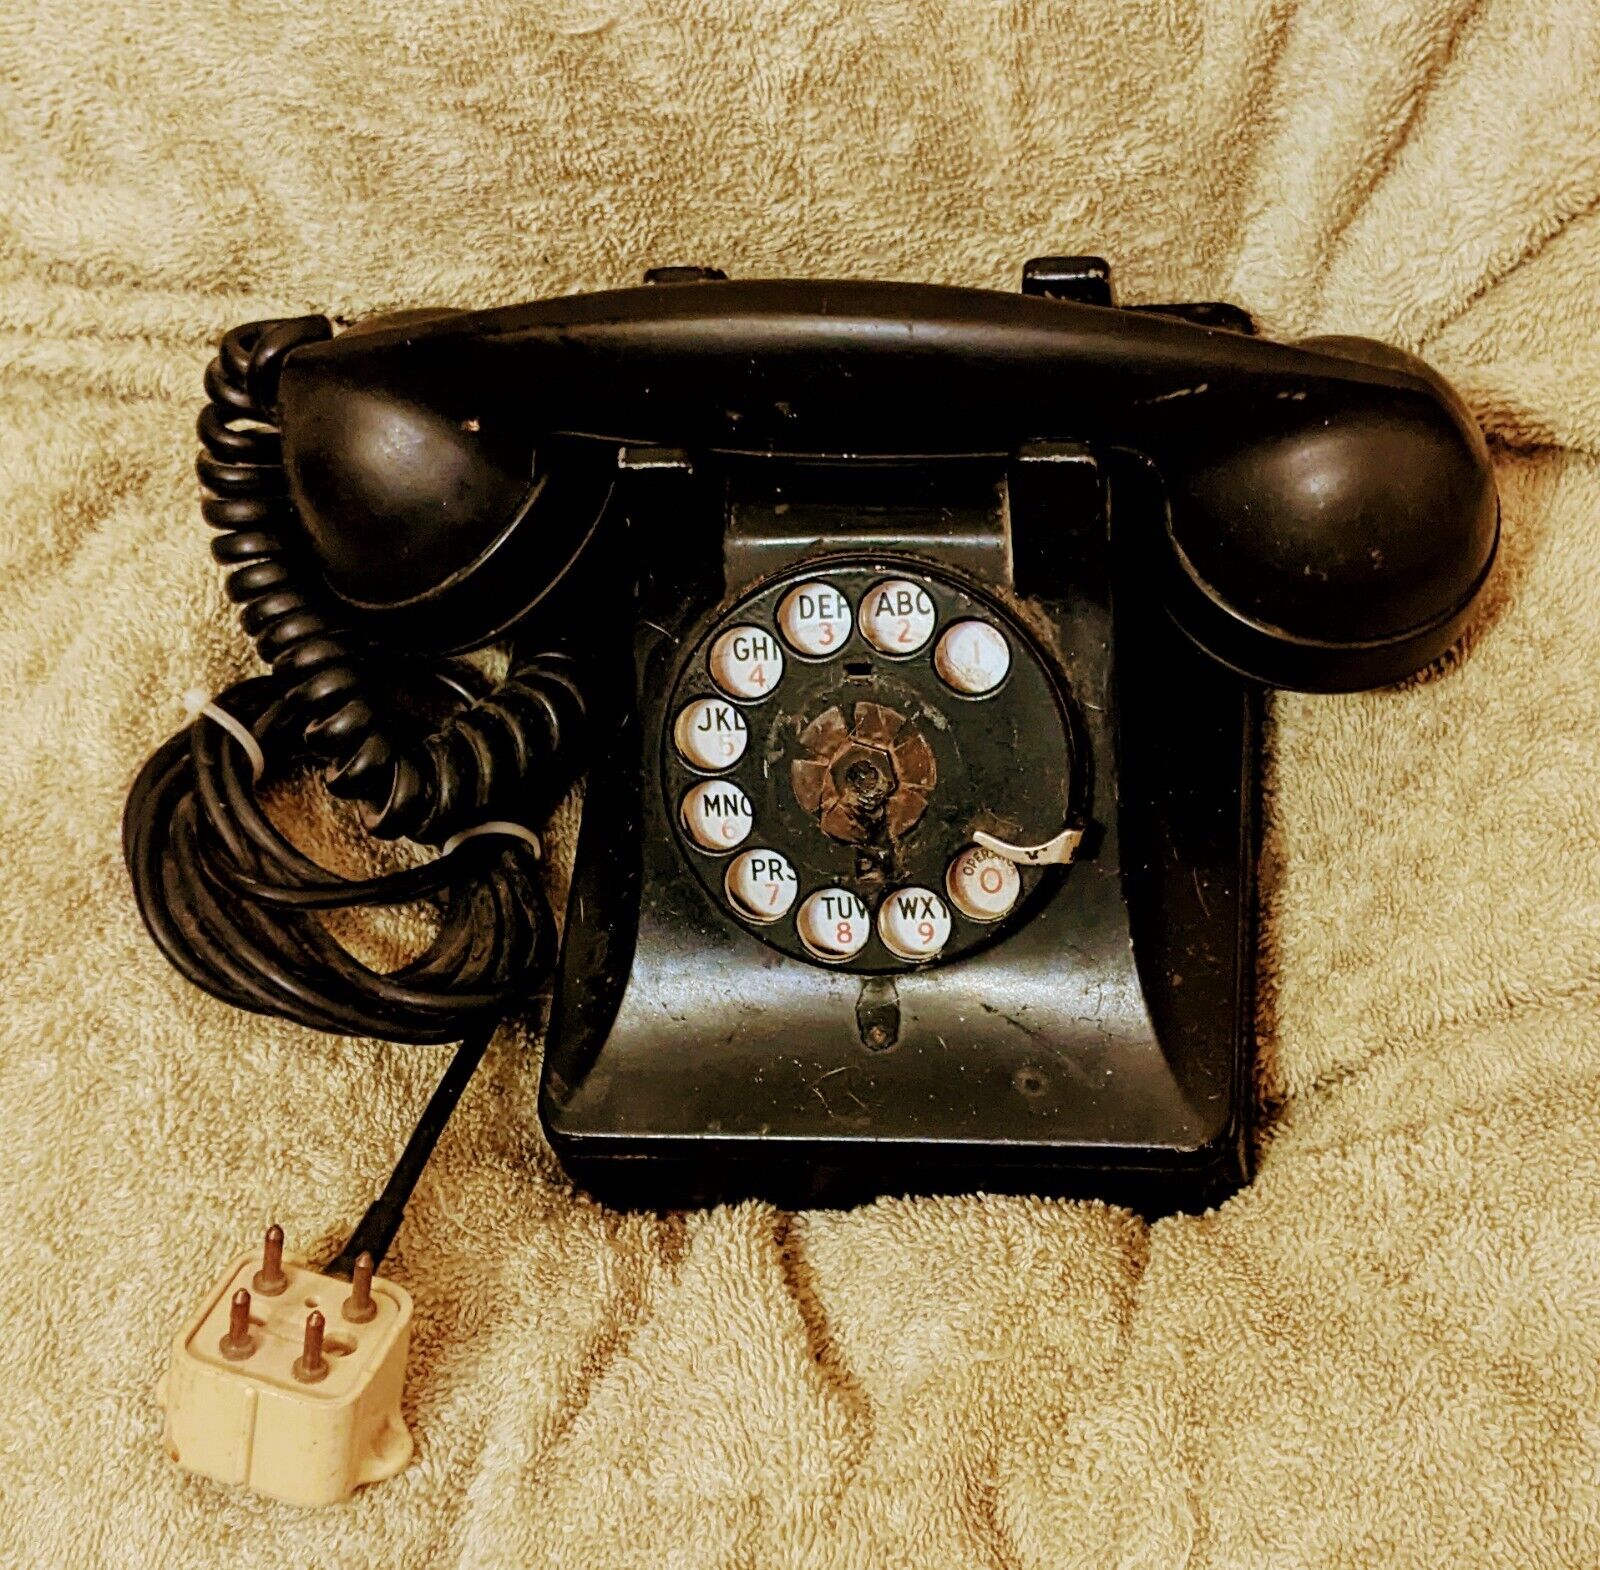 1947 Western Electric Telephone in excellent used condition functional